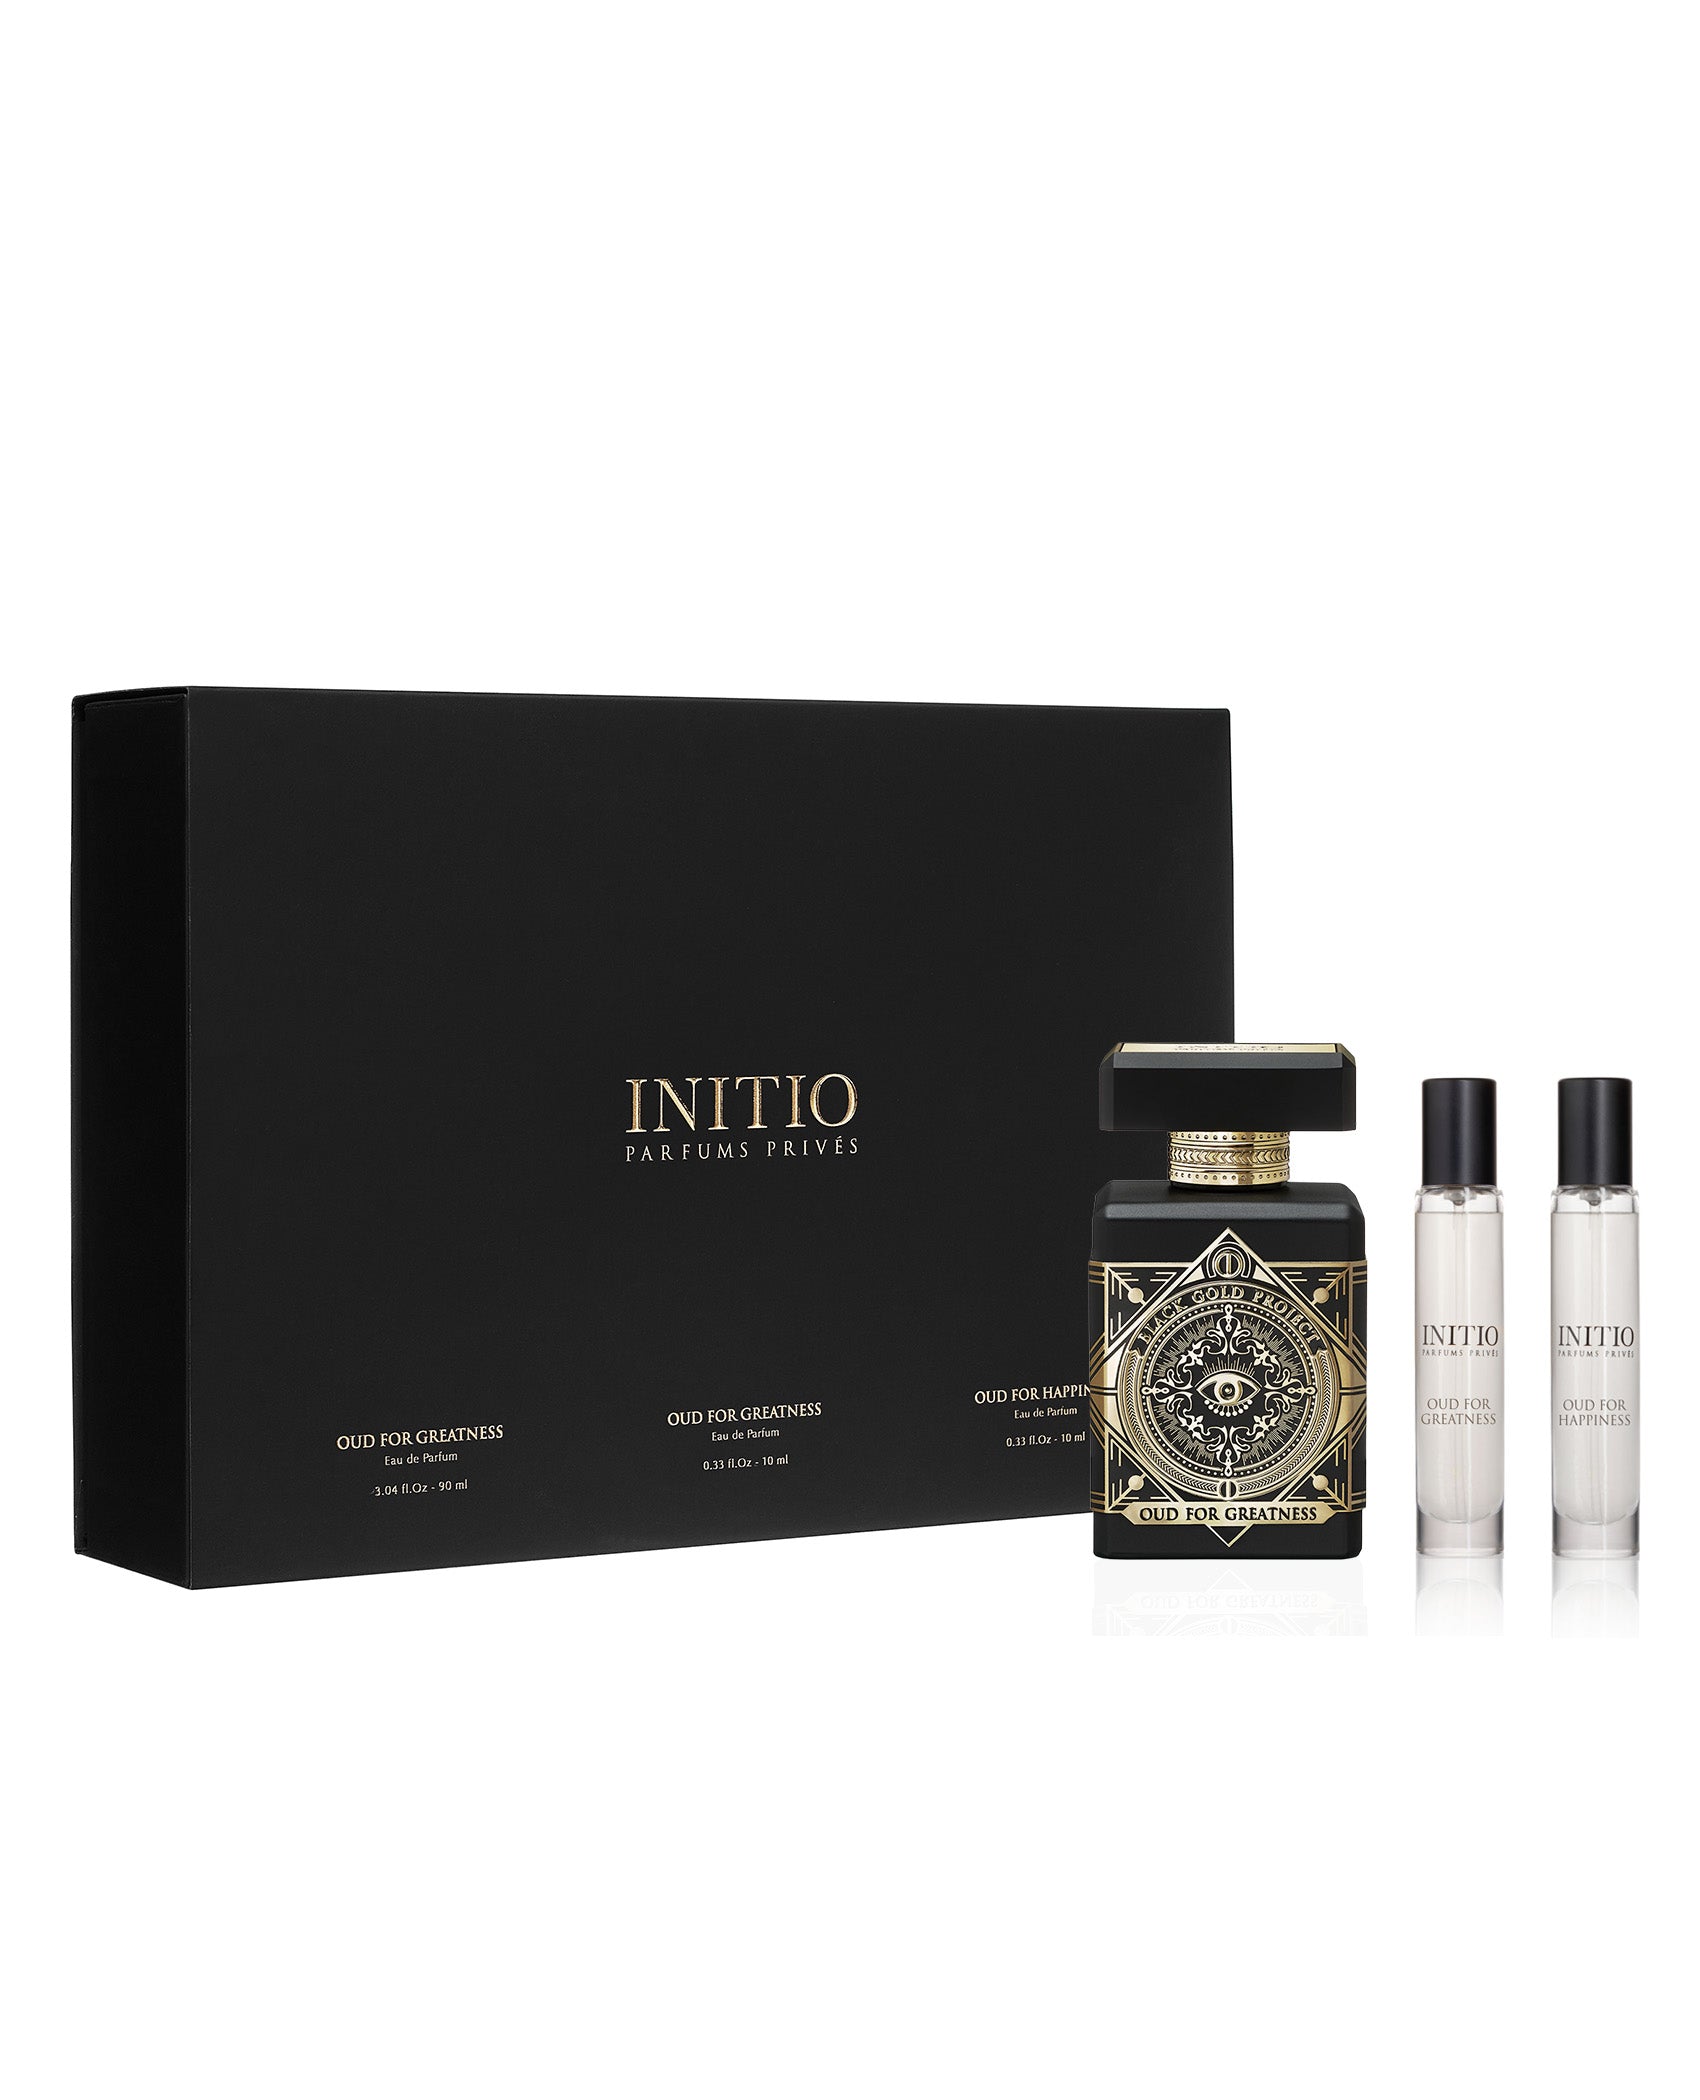 OUD Privés LIMITED SET INITIO FOR GREATNESS US Parfums EDITION –